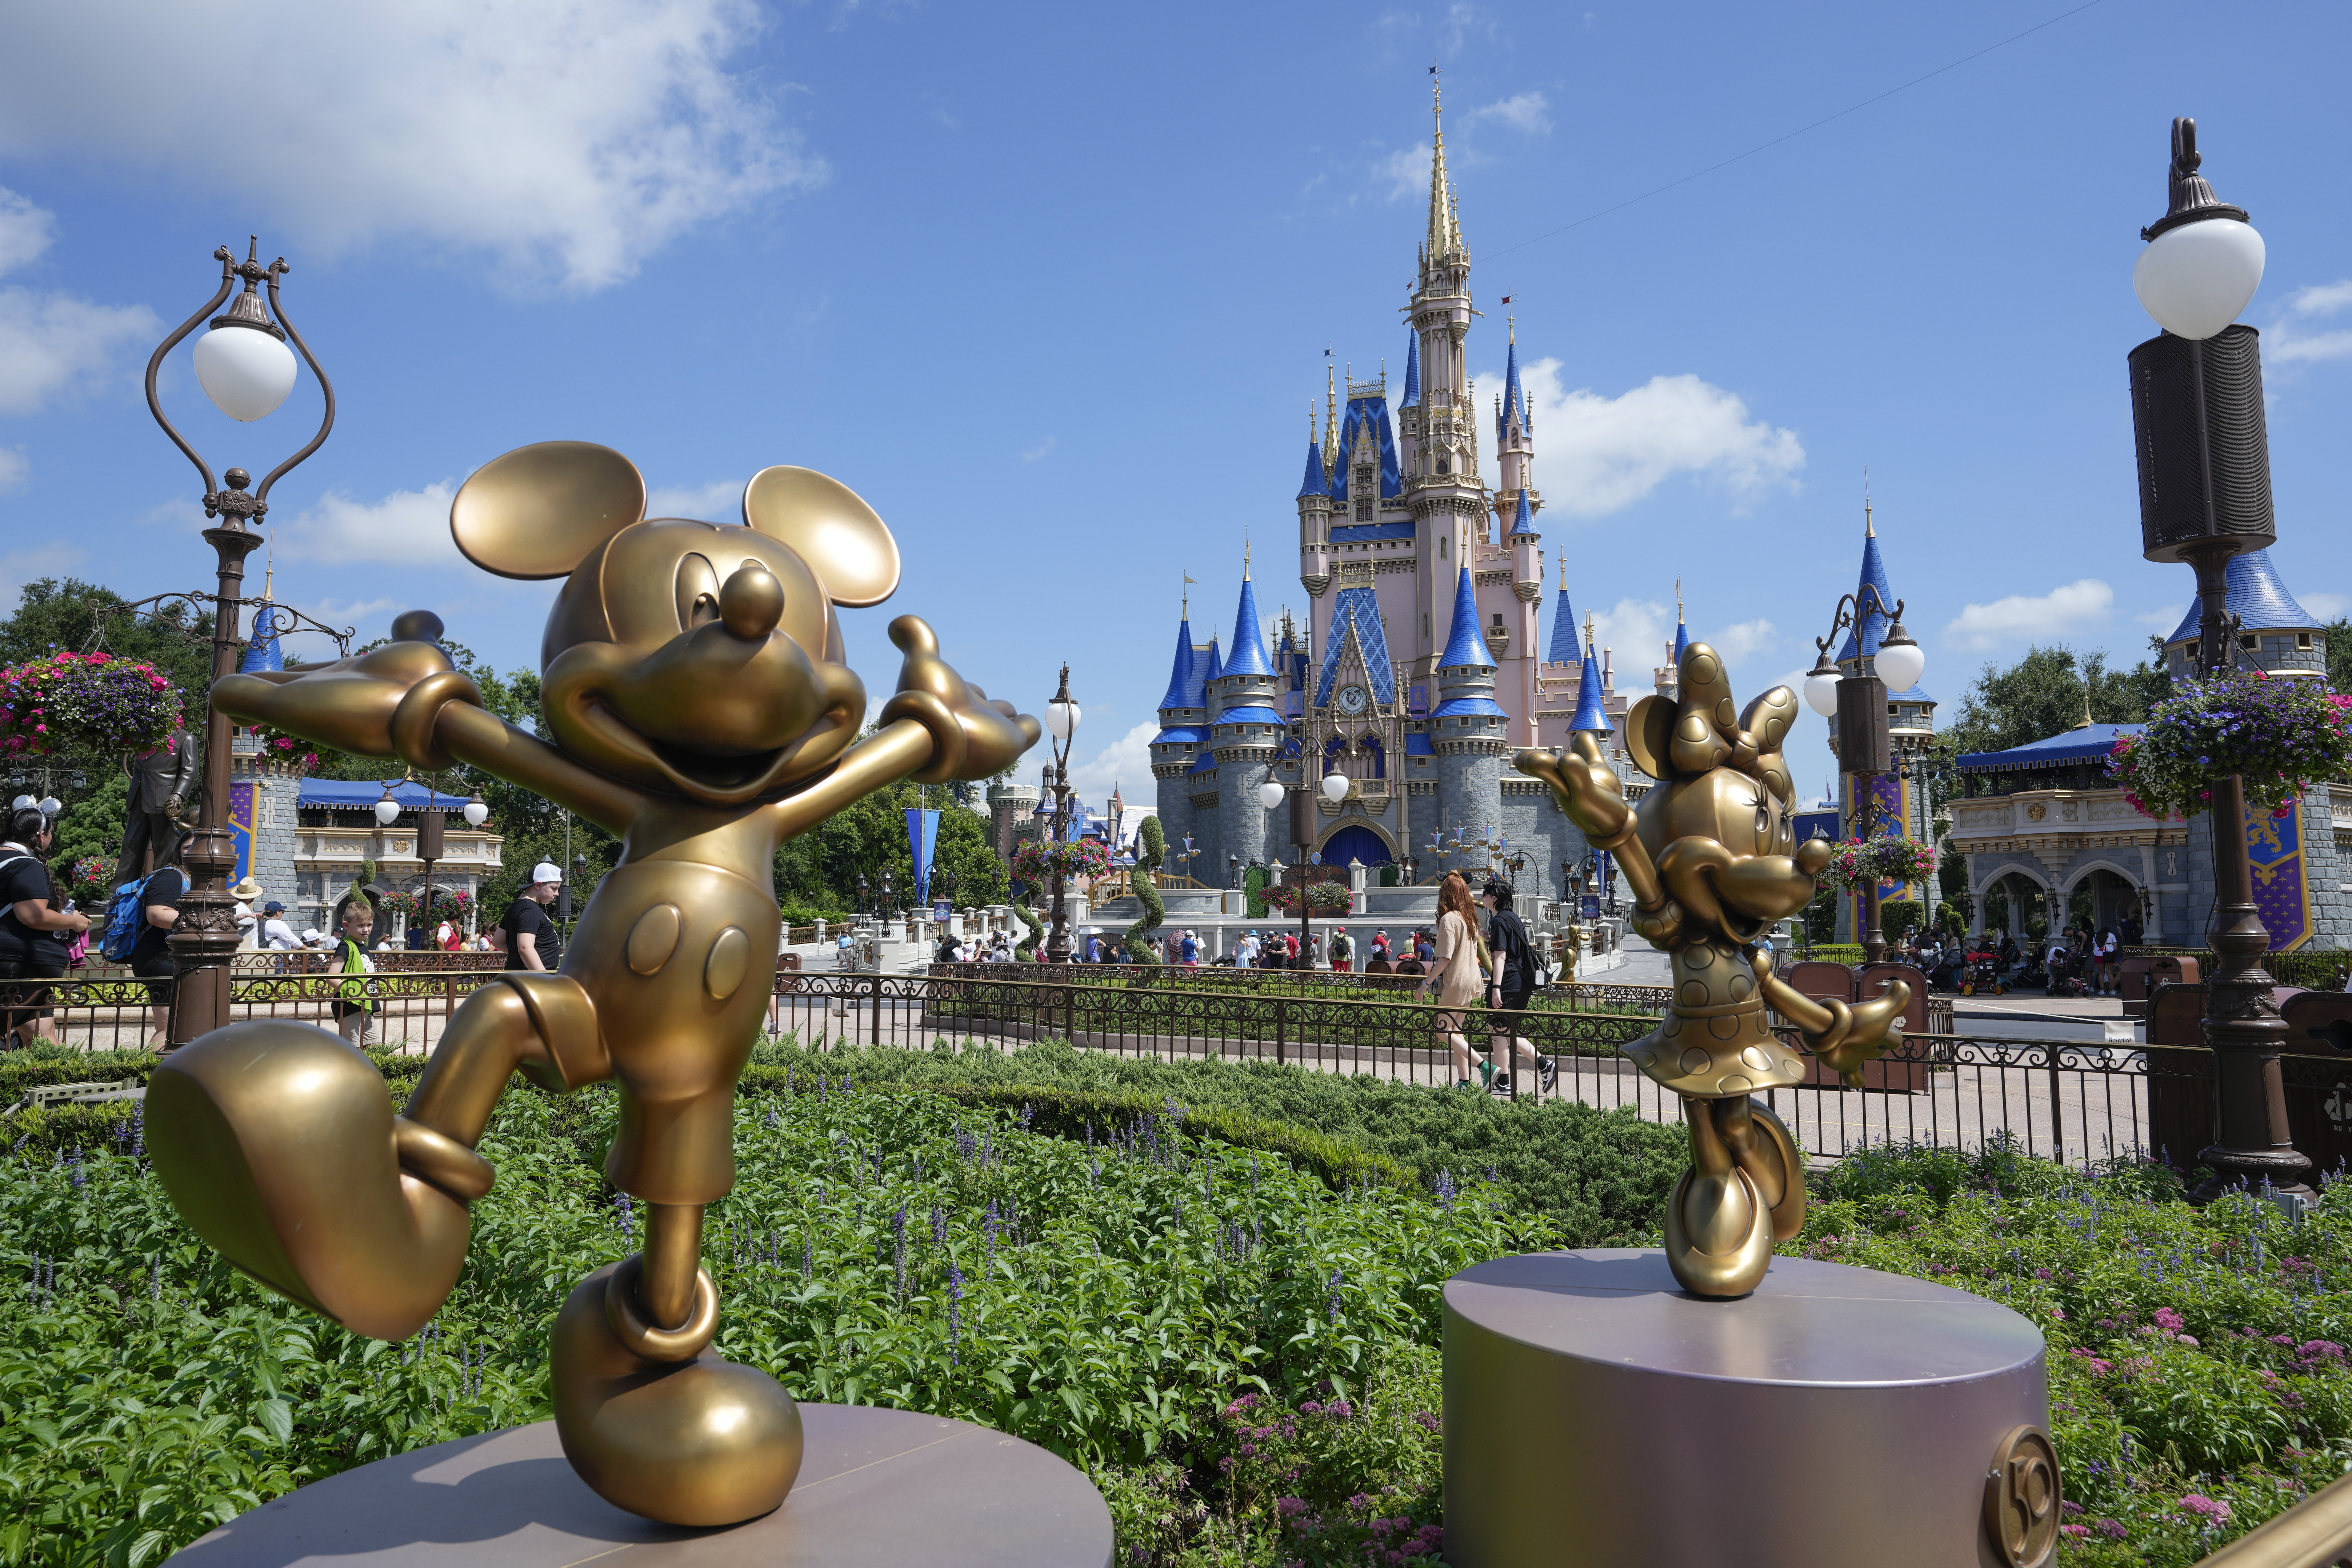 Free Disney World passes is latest front in war between Disney and